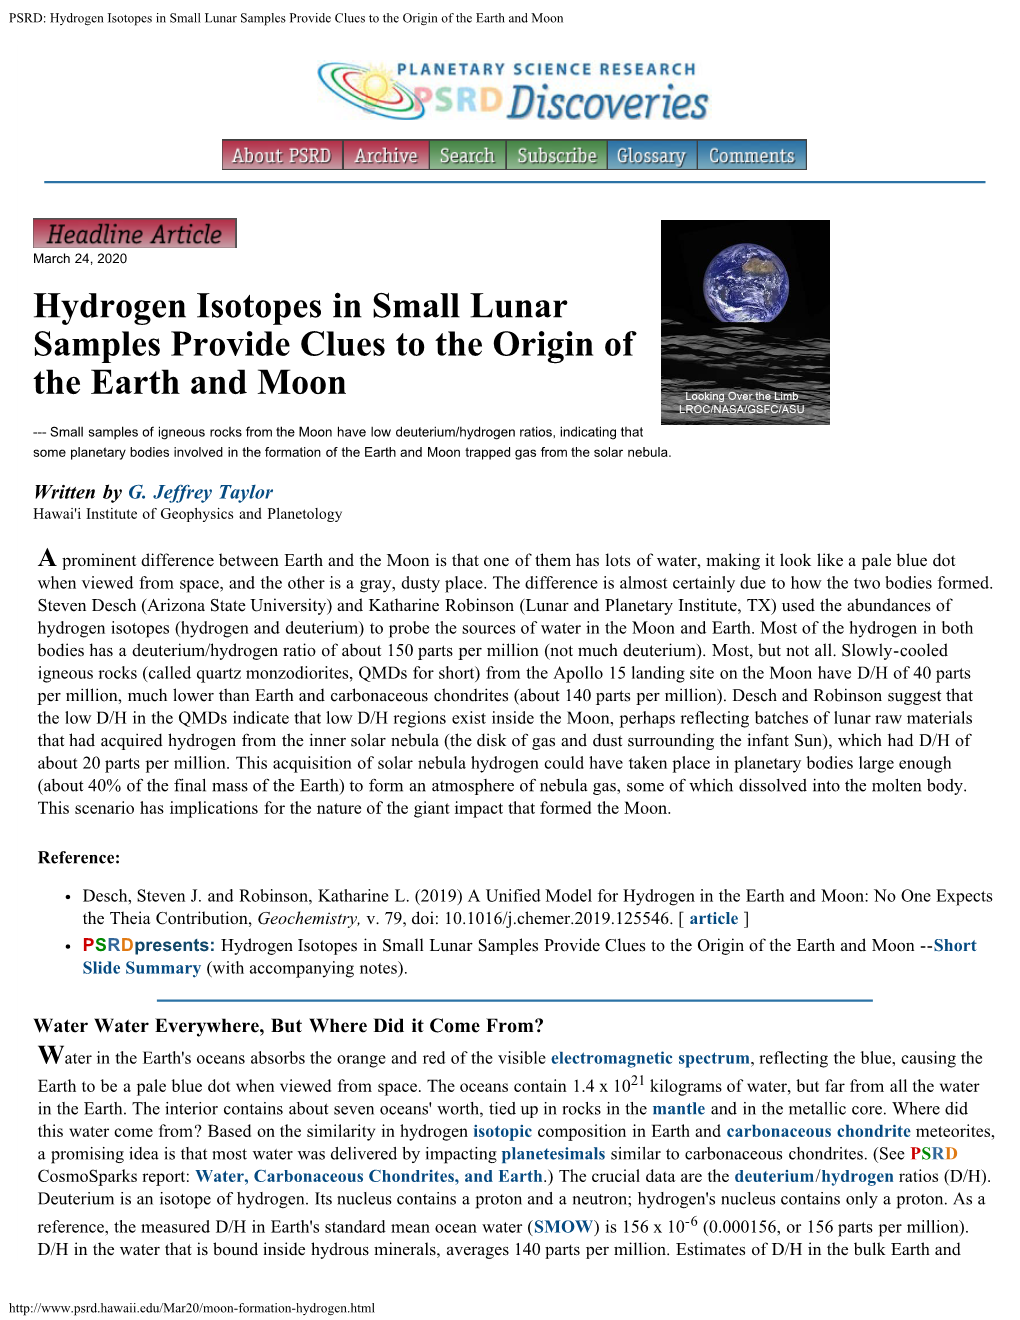 PSRD: Hydrogen Isotopes in Small Lunar Samples Provide Clues to the Origin of the Earth and Moon